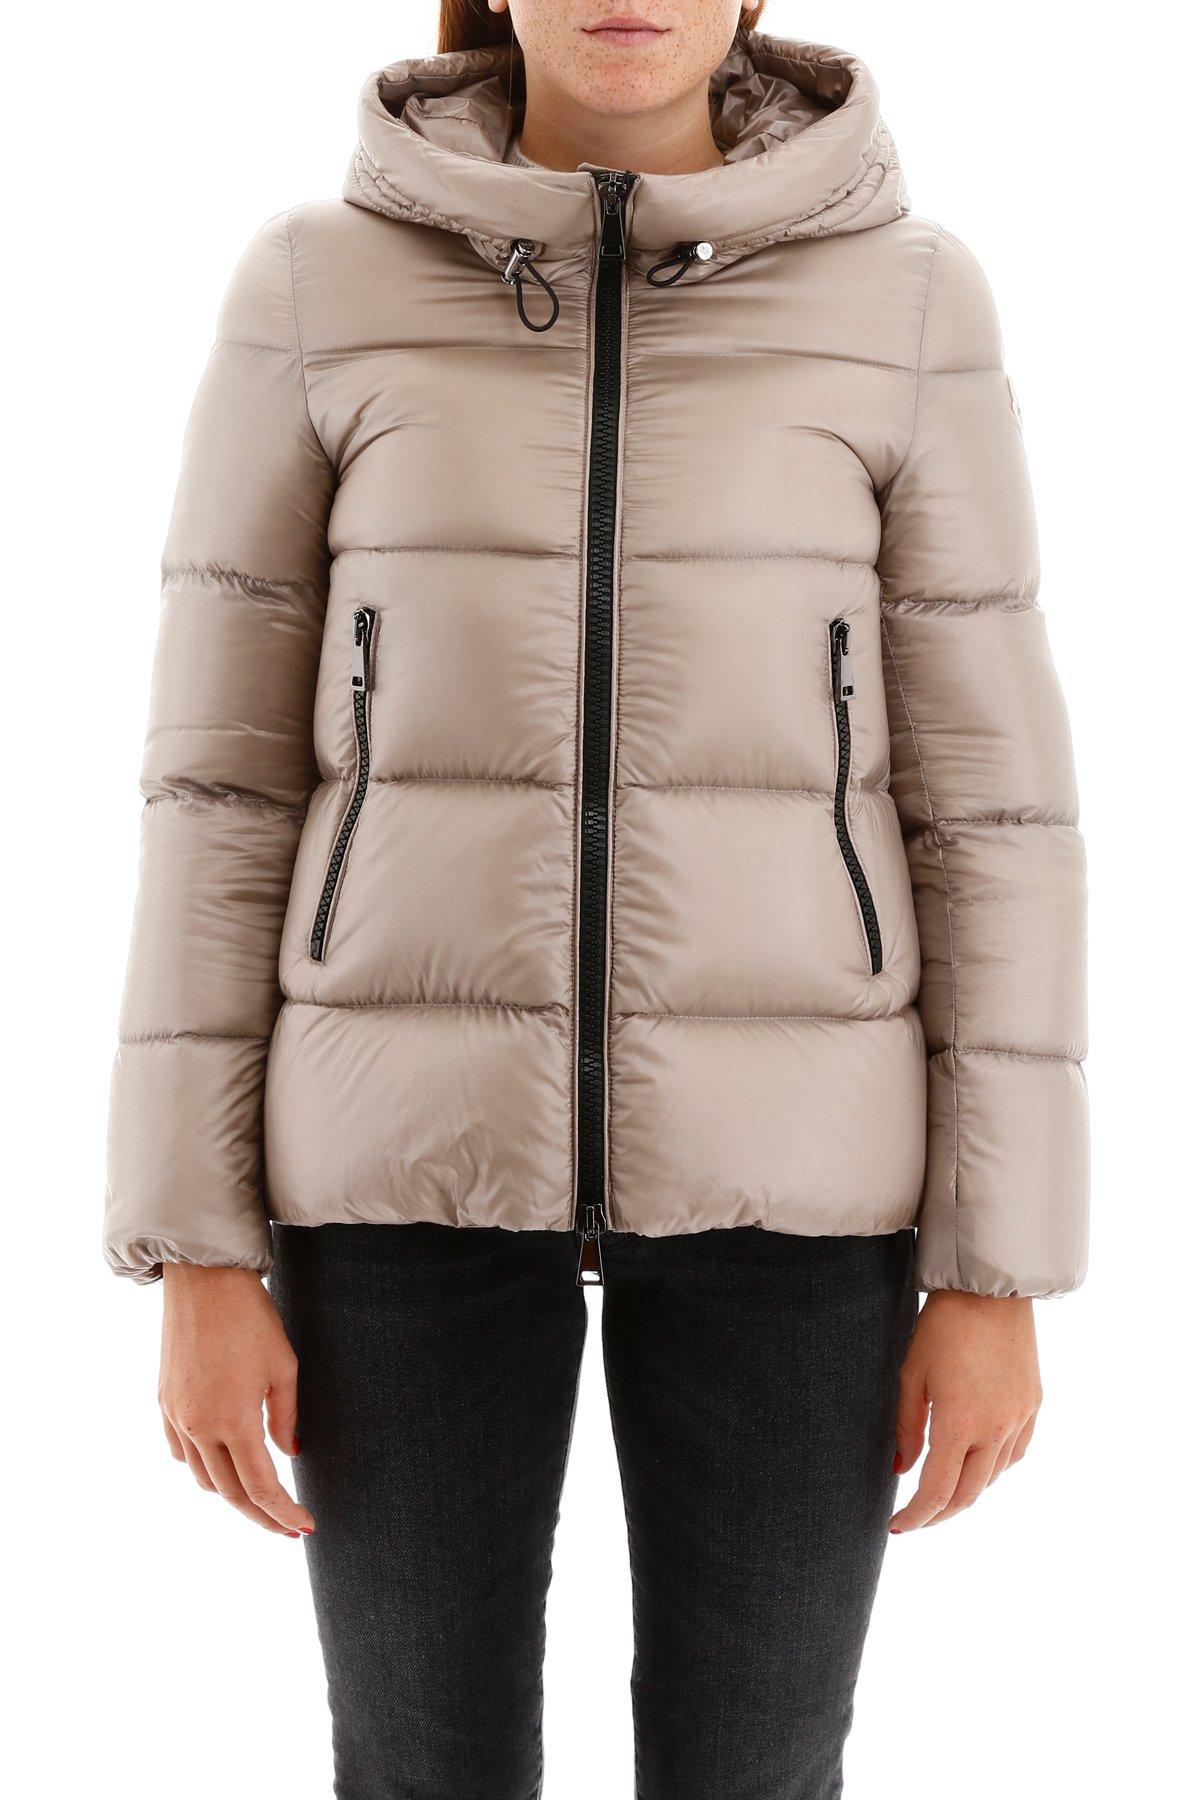 Moncler Seritte Puffer Jacket in Natural | Lyst